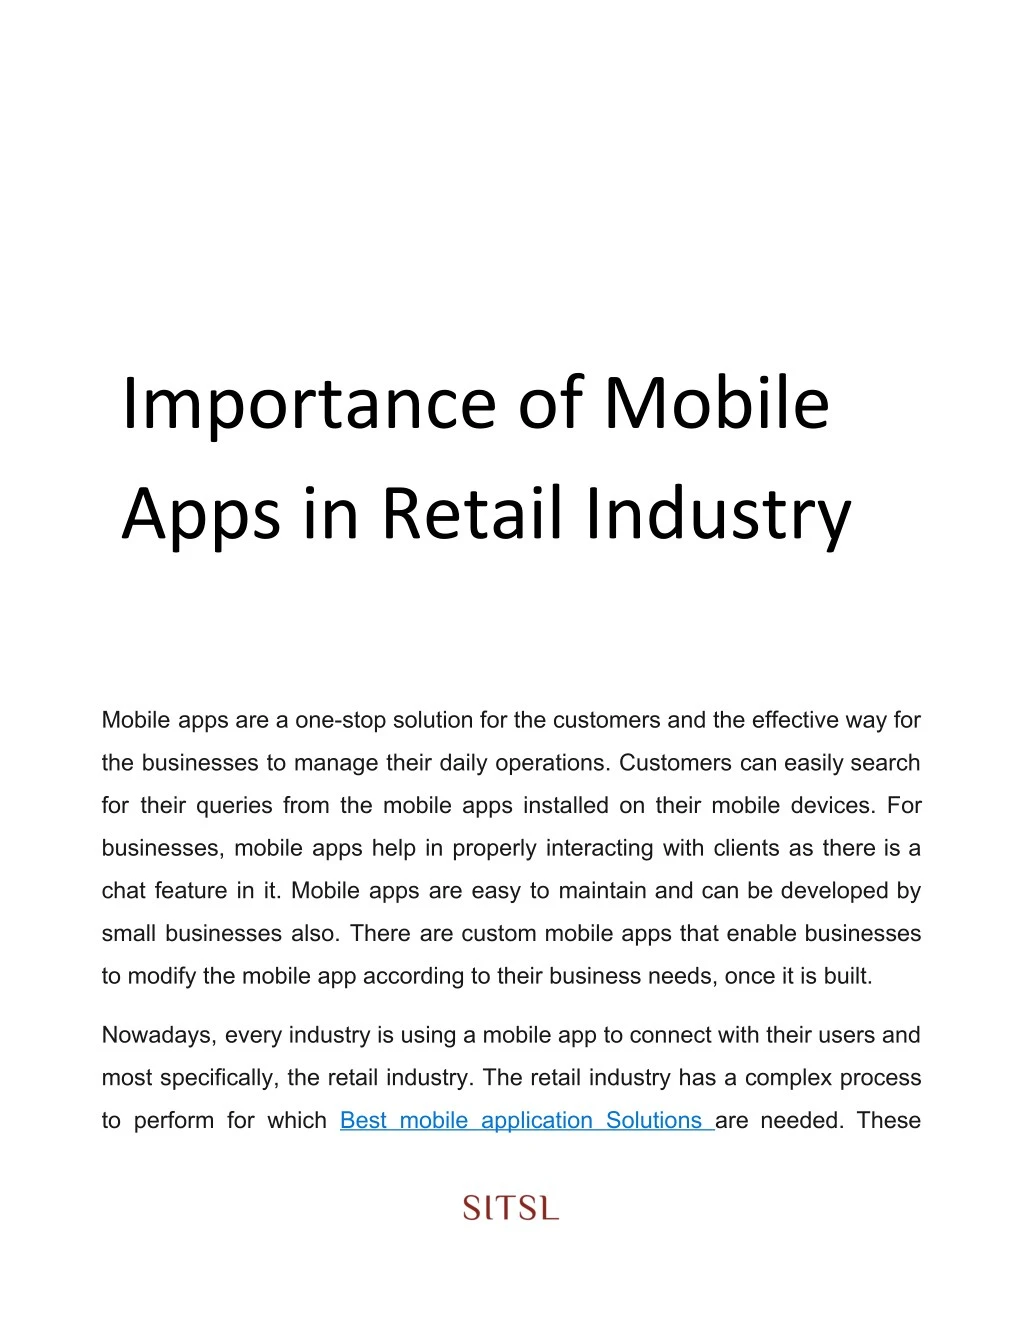 importance of mobile apps in retail industry